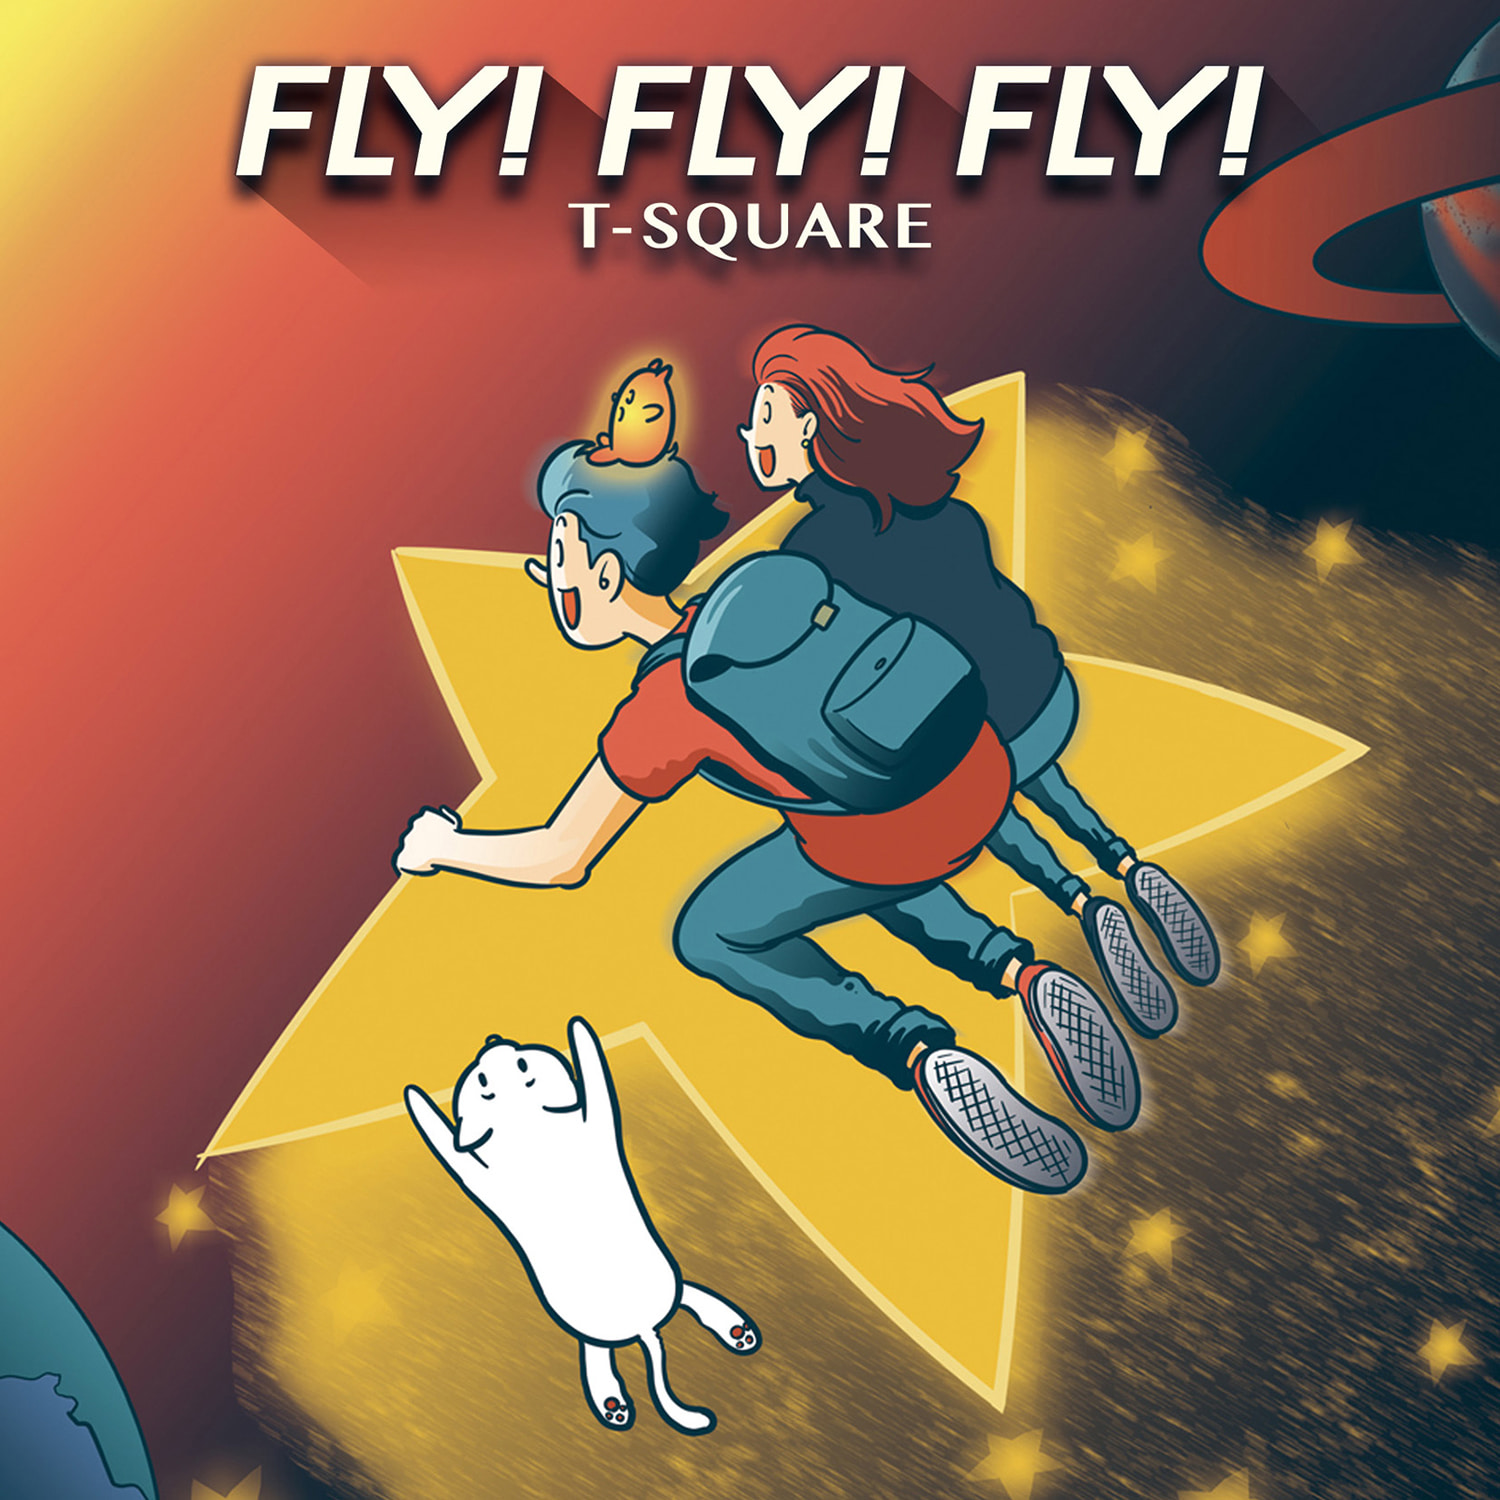 T-SQUARE-FLY! FLY! FLY!